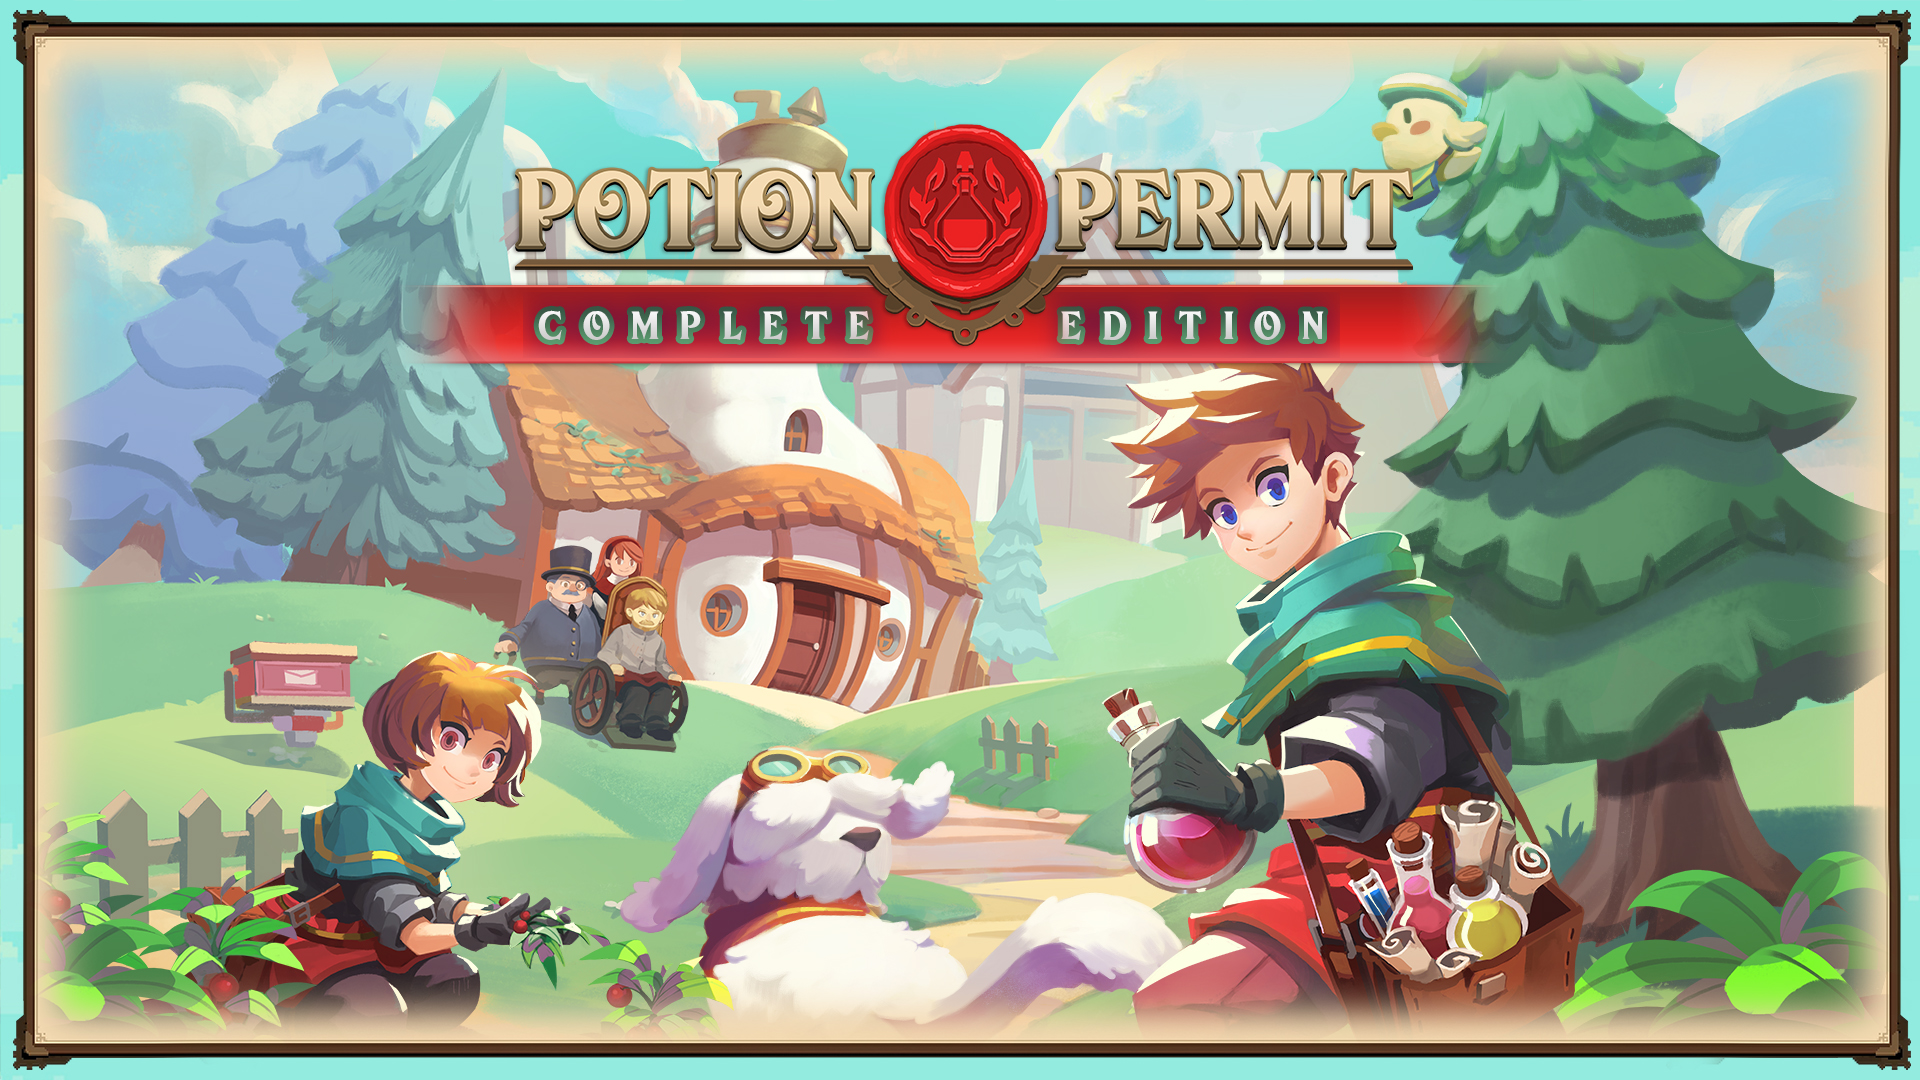 Potion Permit: Complete Edition Revealed With May Release Date; Physical Release With All DLC Confirmed